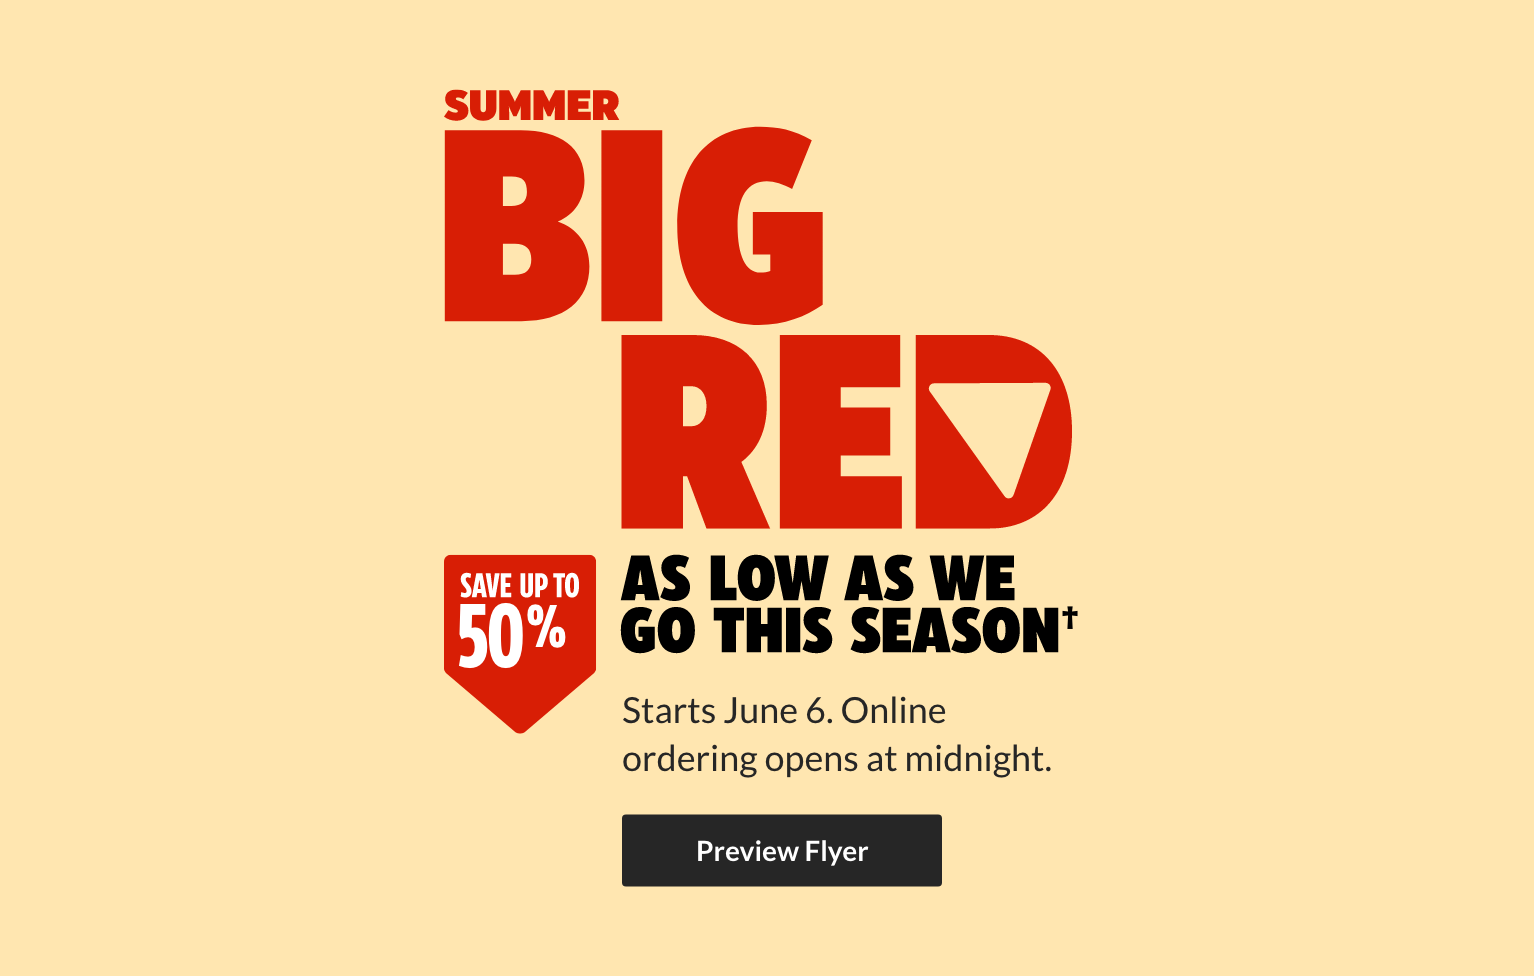 Preview the Summer Big Red flyer now.